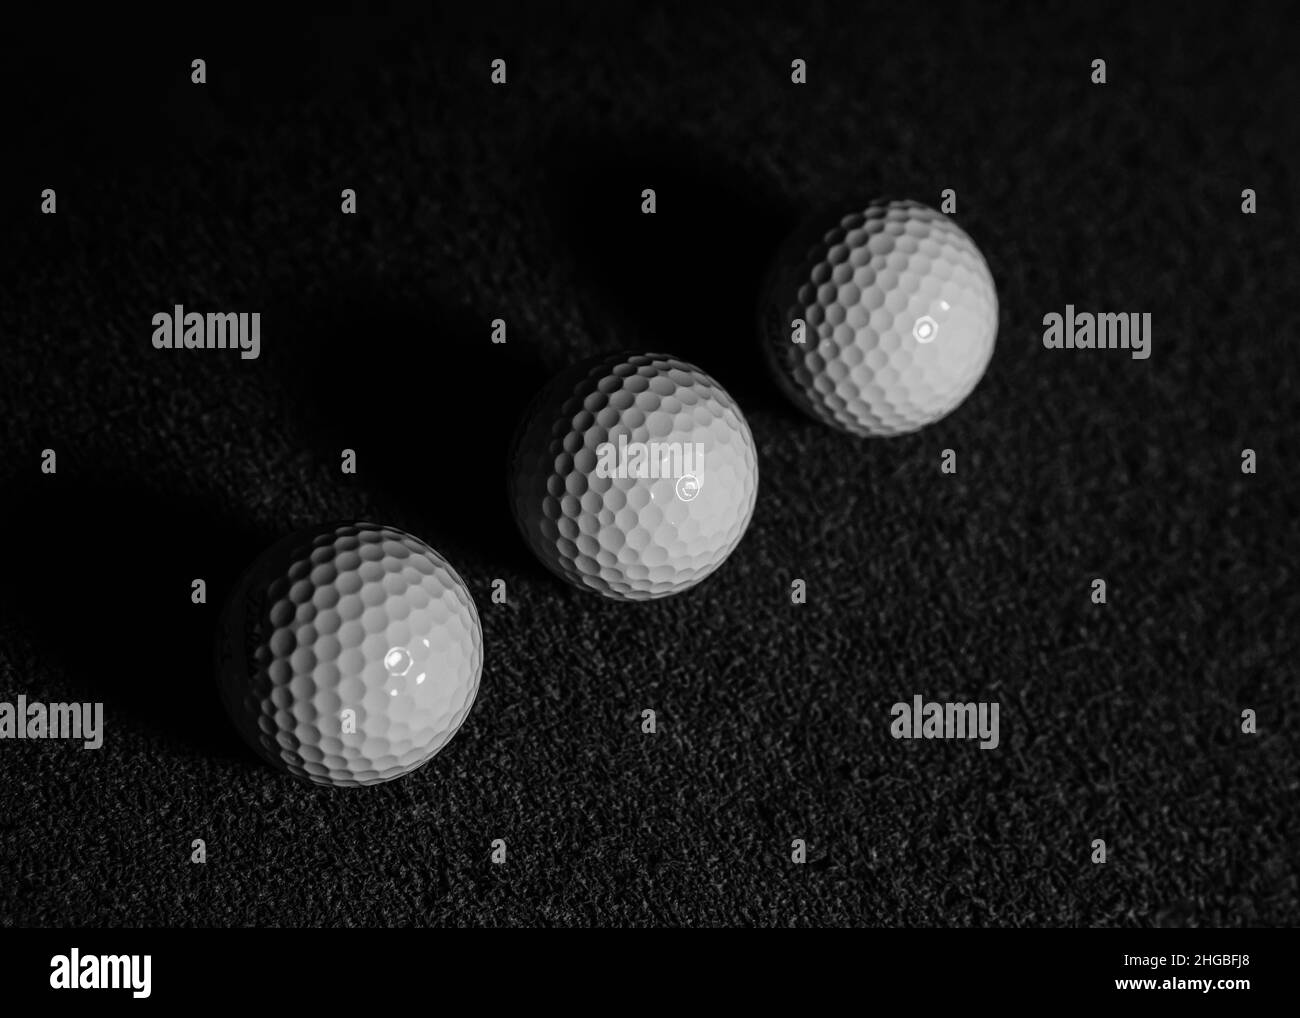 Clean black and white image of three golf balls aligned in a row. Dark shadows with one side of the ball highlighted Stock Photo